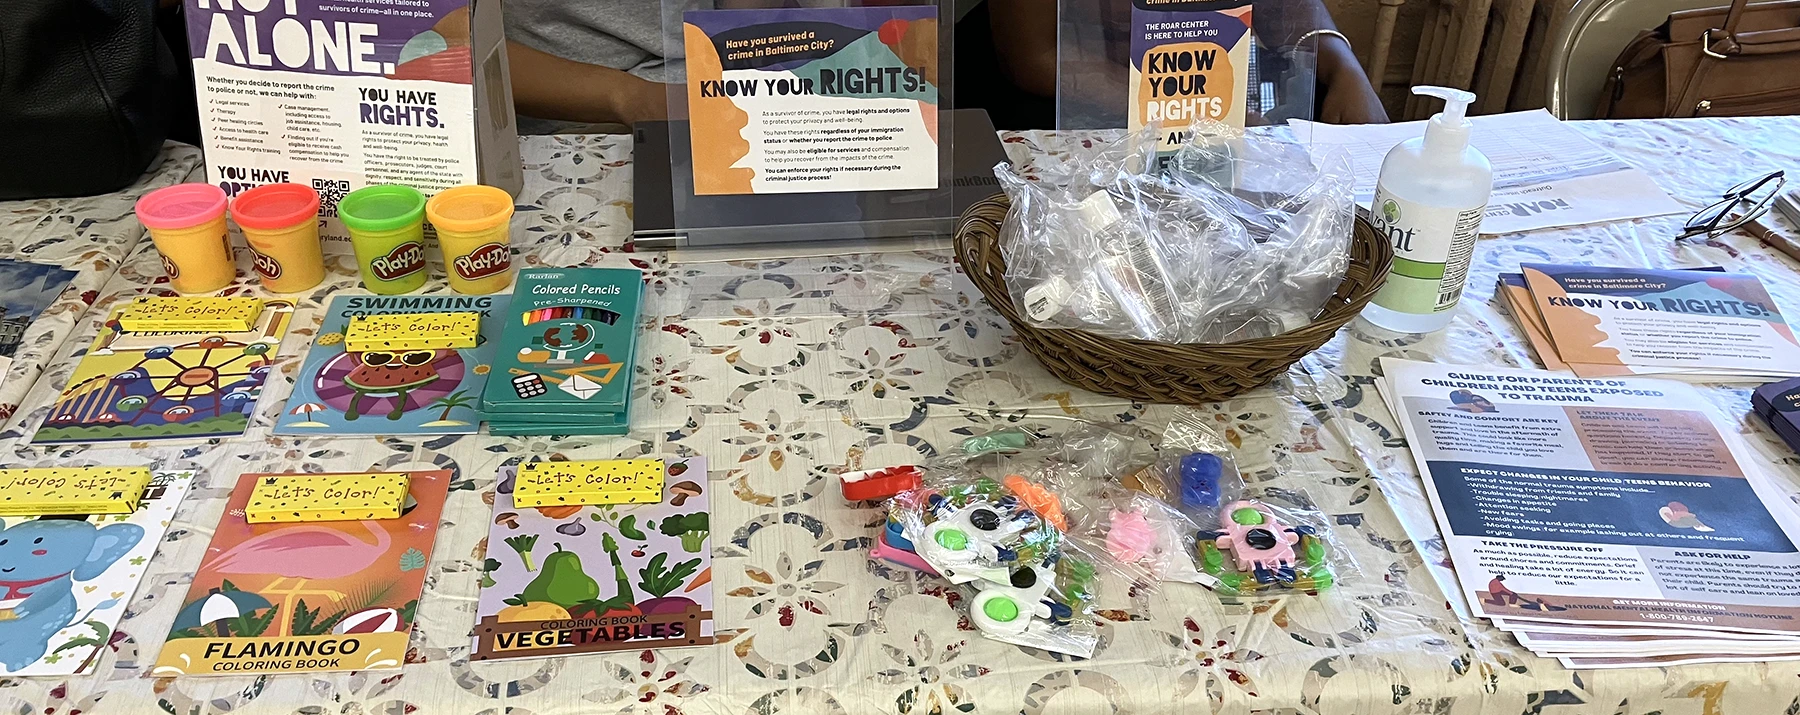 Display collection of informational materials about ROAR services at a community tabling event